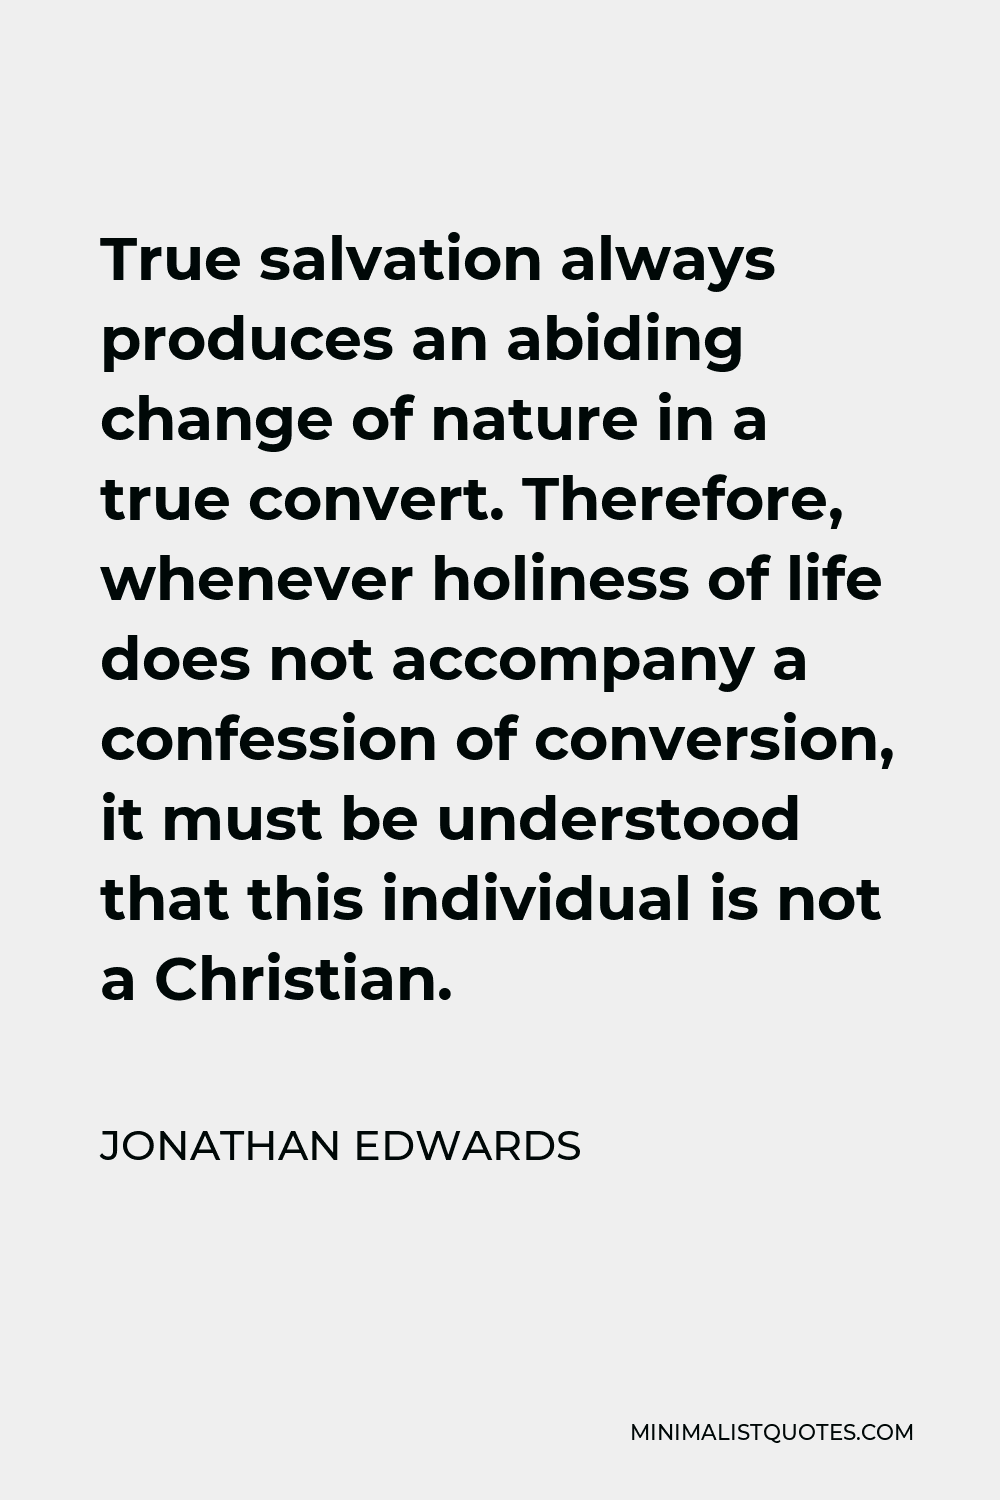 Jonathan Edwards Quote - True salvation always produces an abiding change of nature in a true convert. Therefore, whenever holiness of life does not accompany a confession of conversion, it must be understood that this individual is not a Christian.